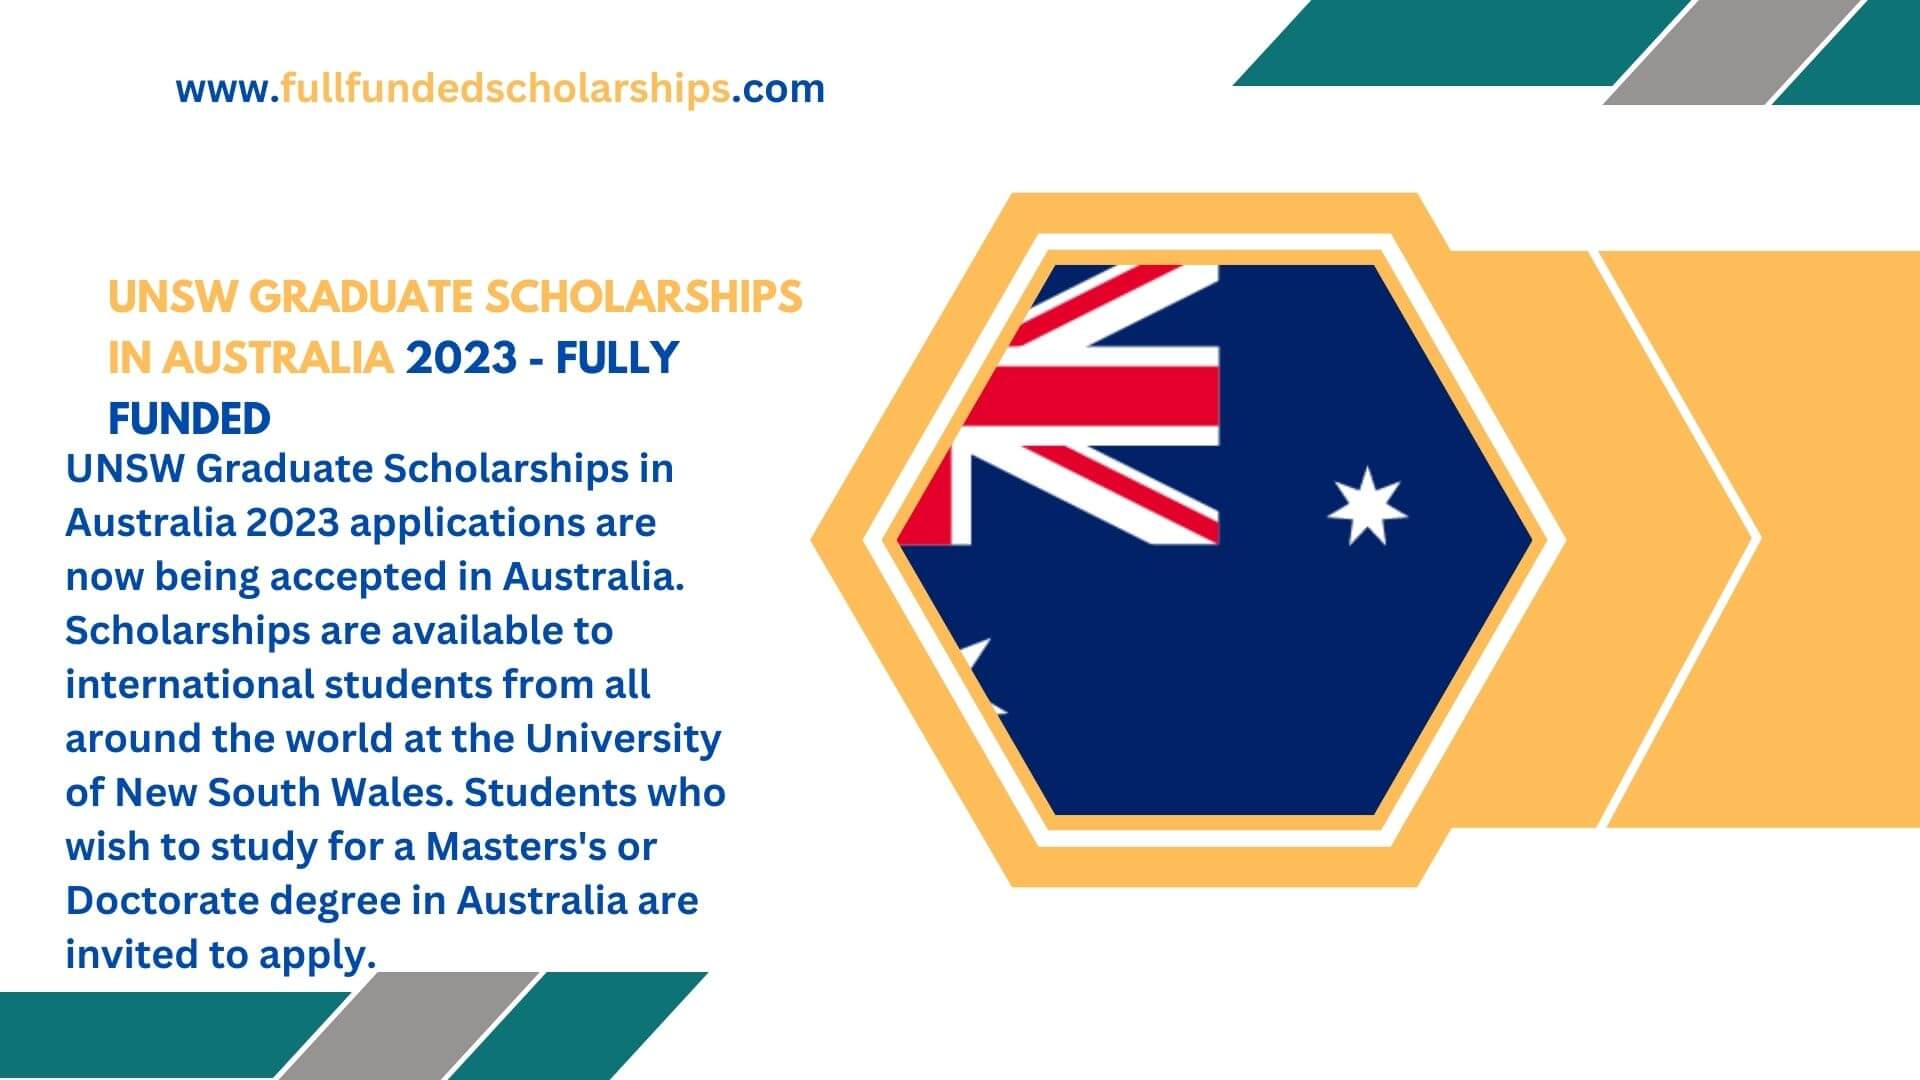 UNSW Graduate Scholarships in Australia 2023 - Fully Funded